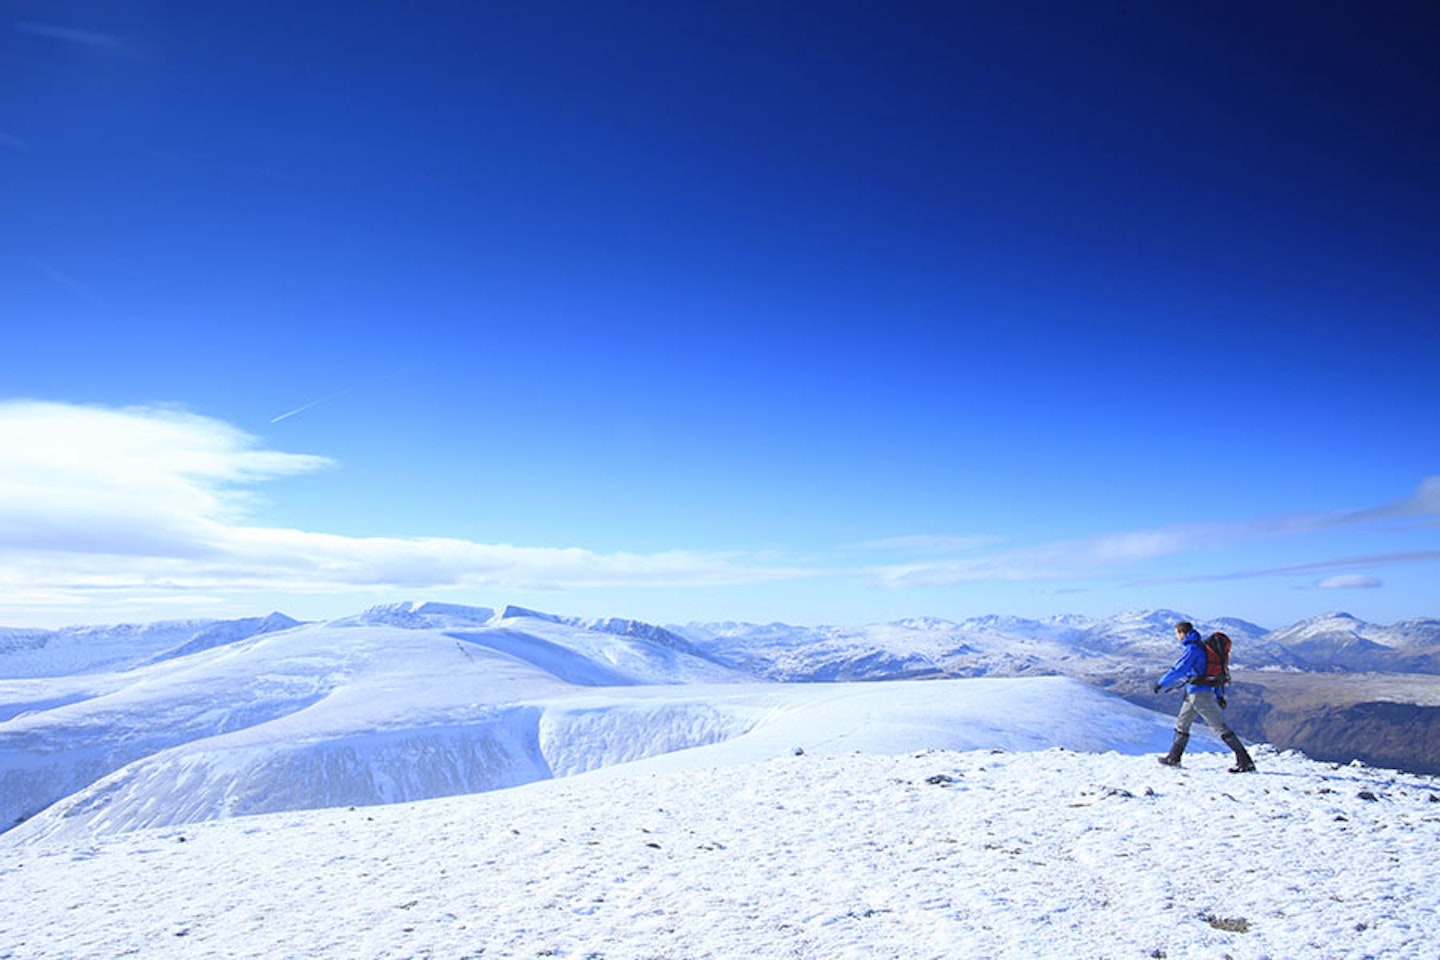 vWalking in a winter wonderland on the Eastern Fells of the Lake District.